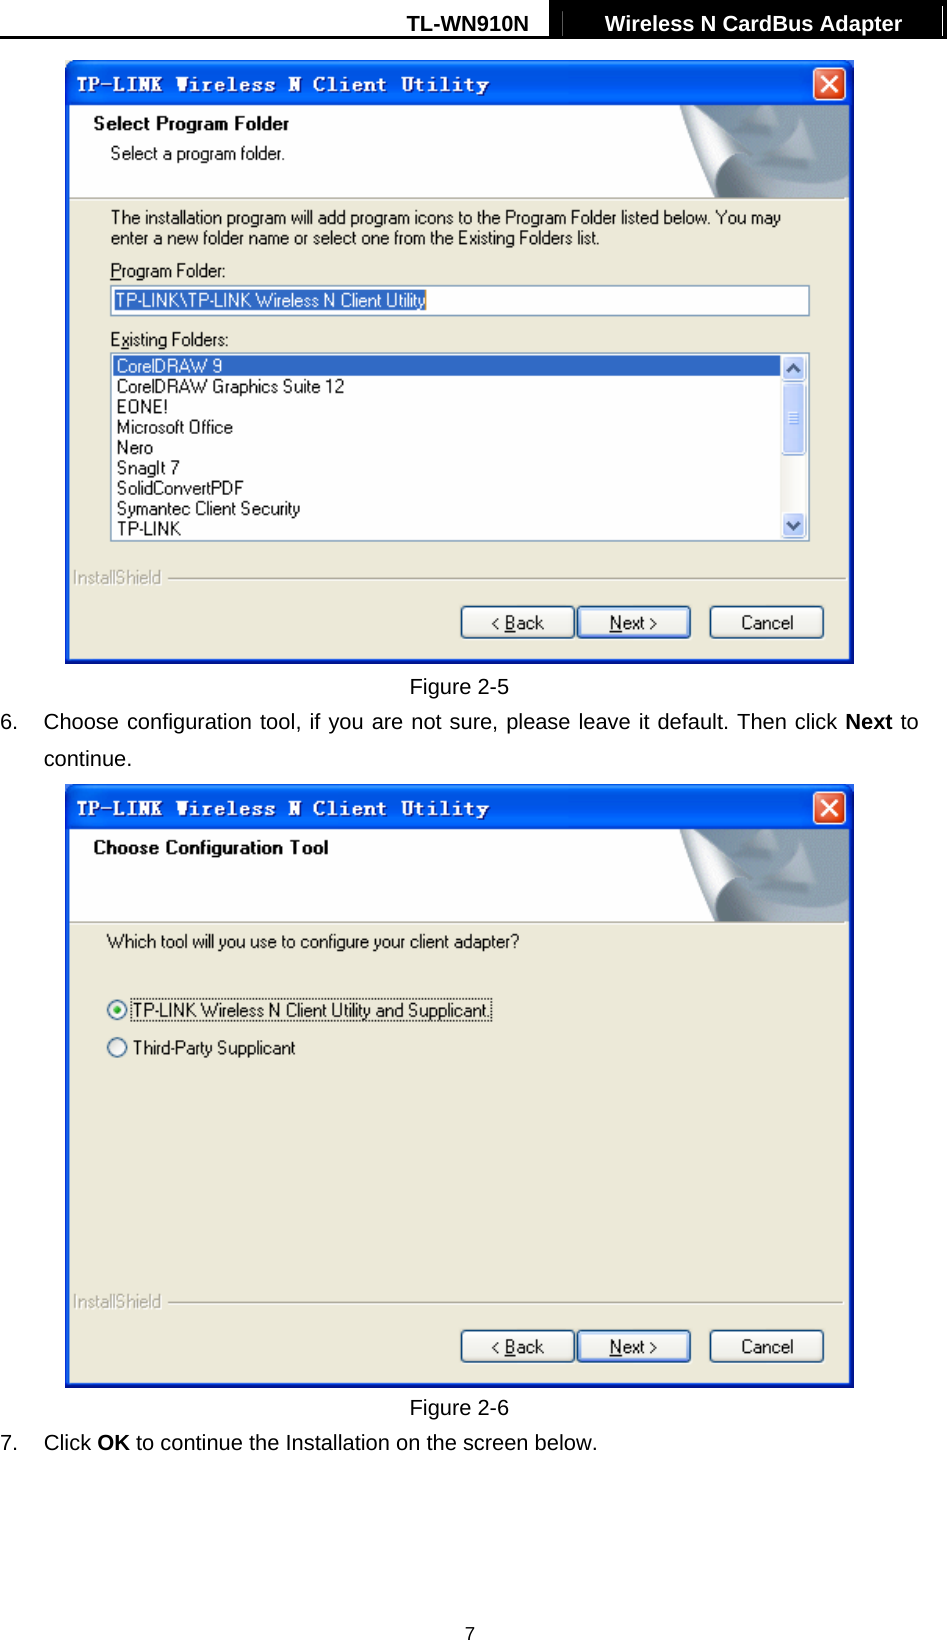 TL-WN910N  Wireless N CardBus Adapter   7 Figure 2-5 6.  Choose configuration tool, if you are not sure, please leave it default. Then click Next to continue.  Figure 2-6 7. Click OK to continue the Installation on the screen below. 